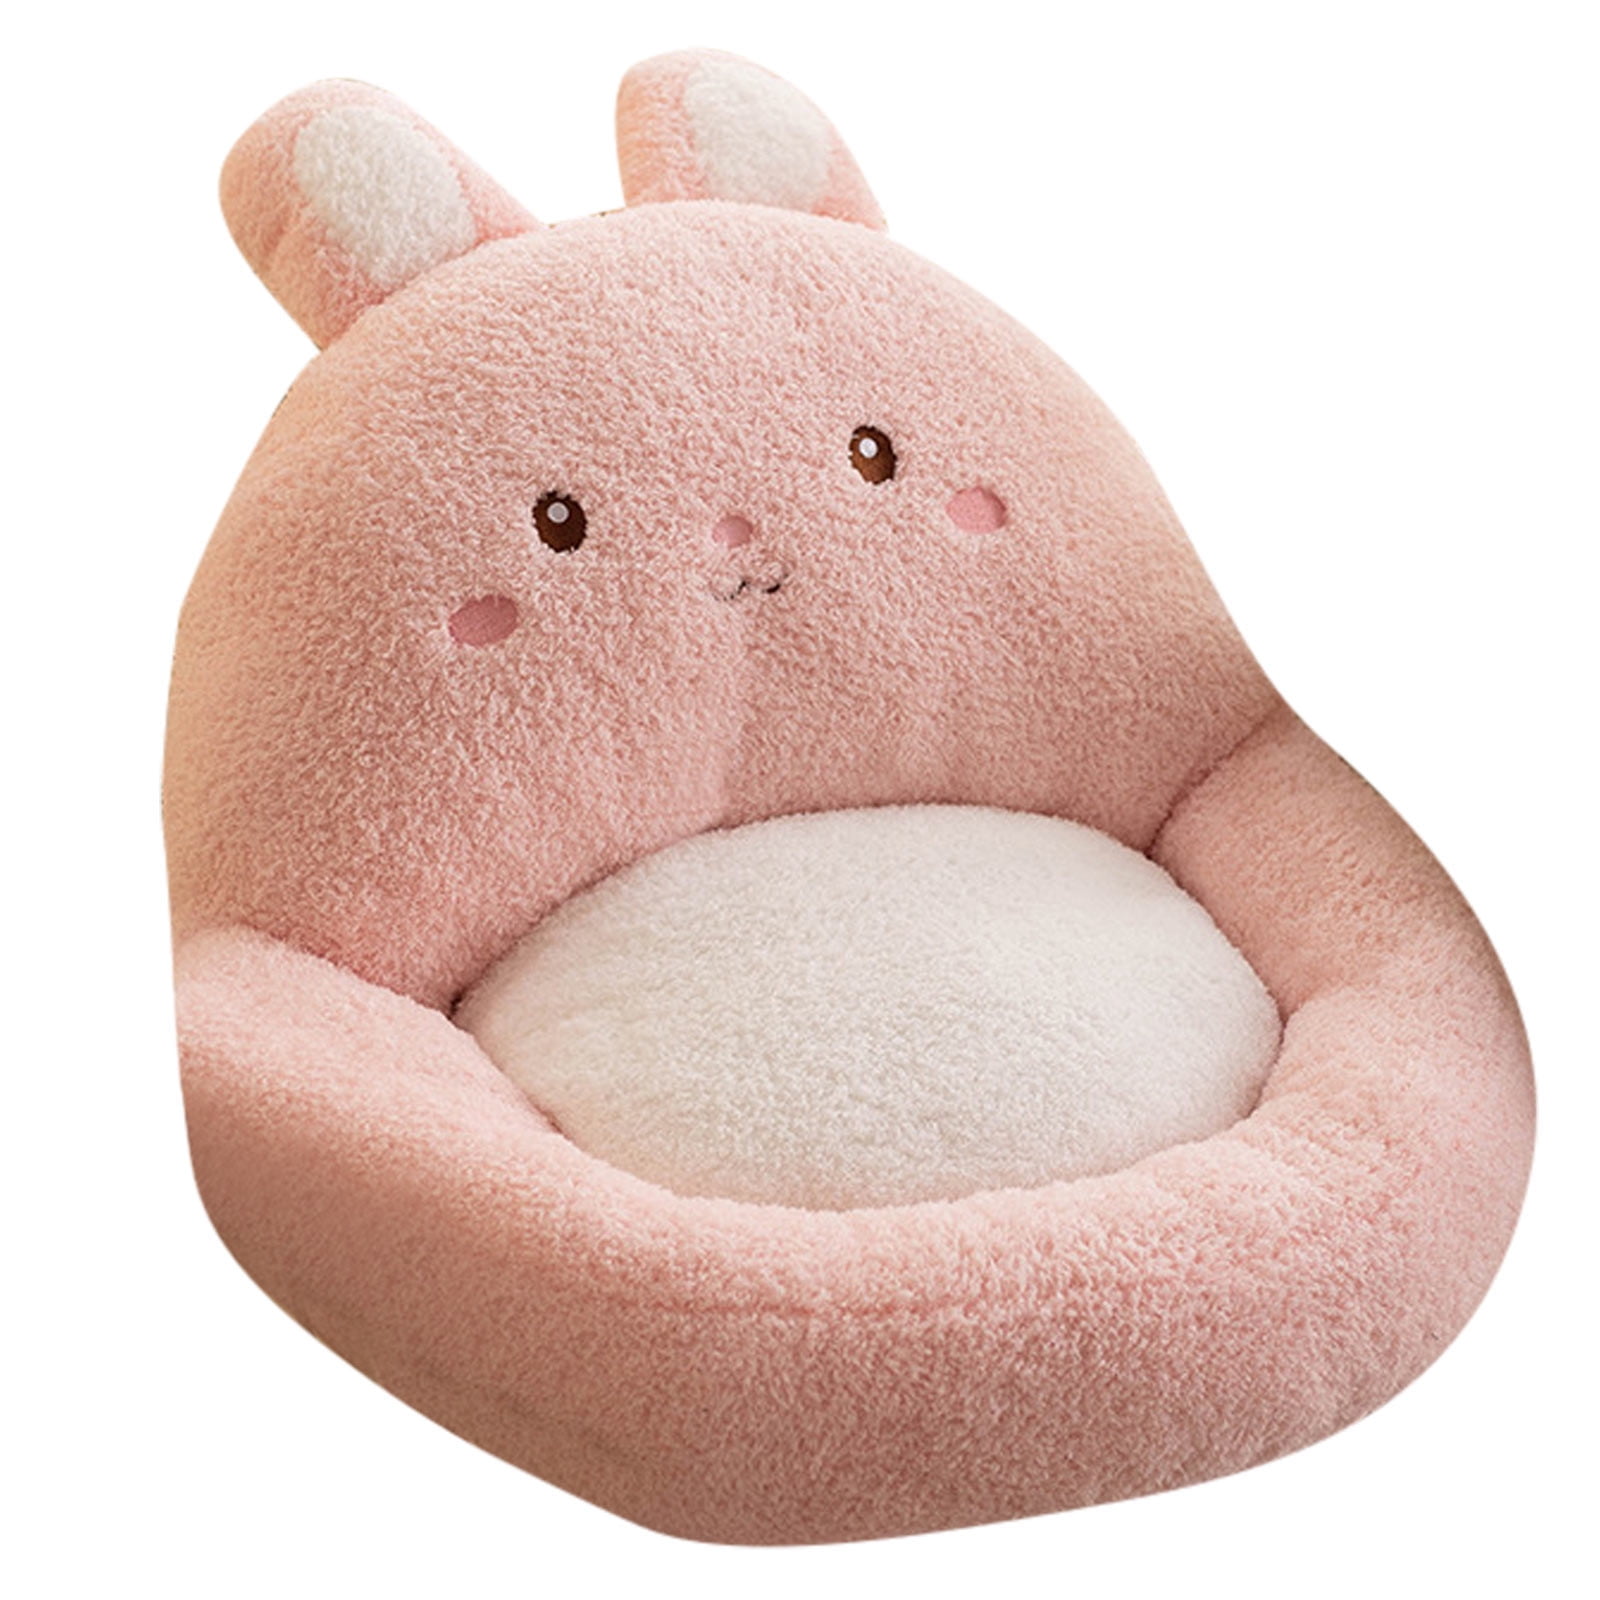 Cute Gaming Chair Cushion Kawaii Indoor Seat Cushions for Office Chair Comfy Plush Pillows for with Non Slip Backing for Khaki, Size: One size, Brown